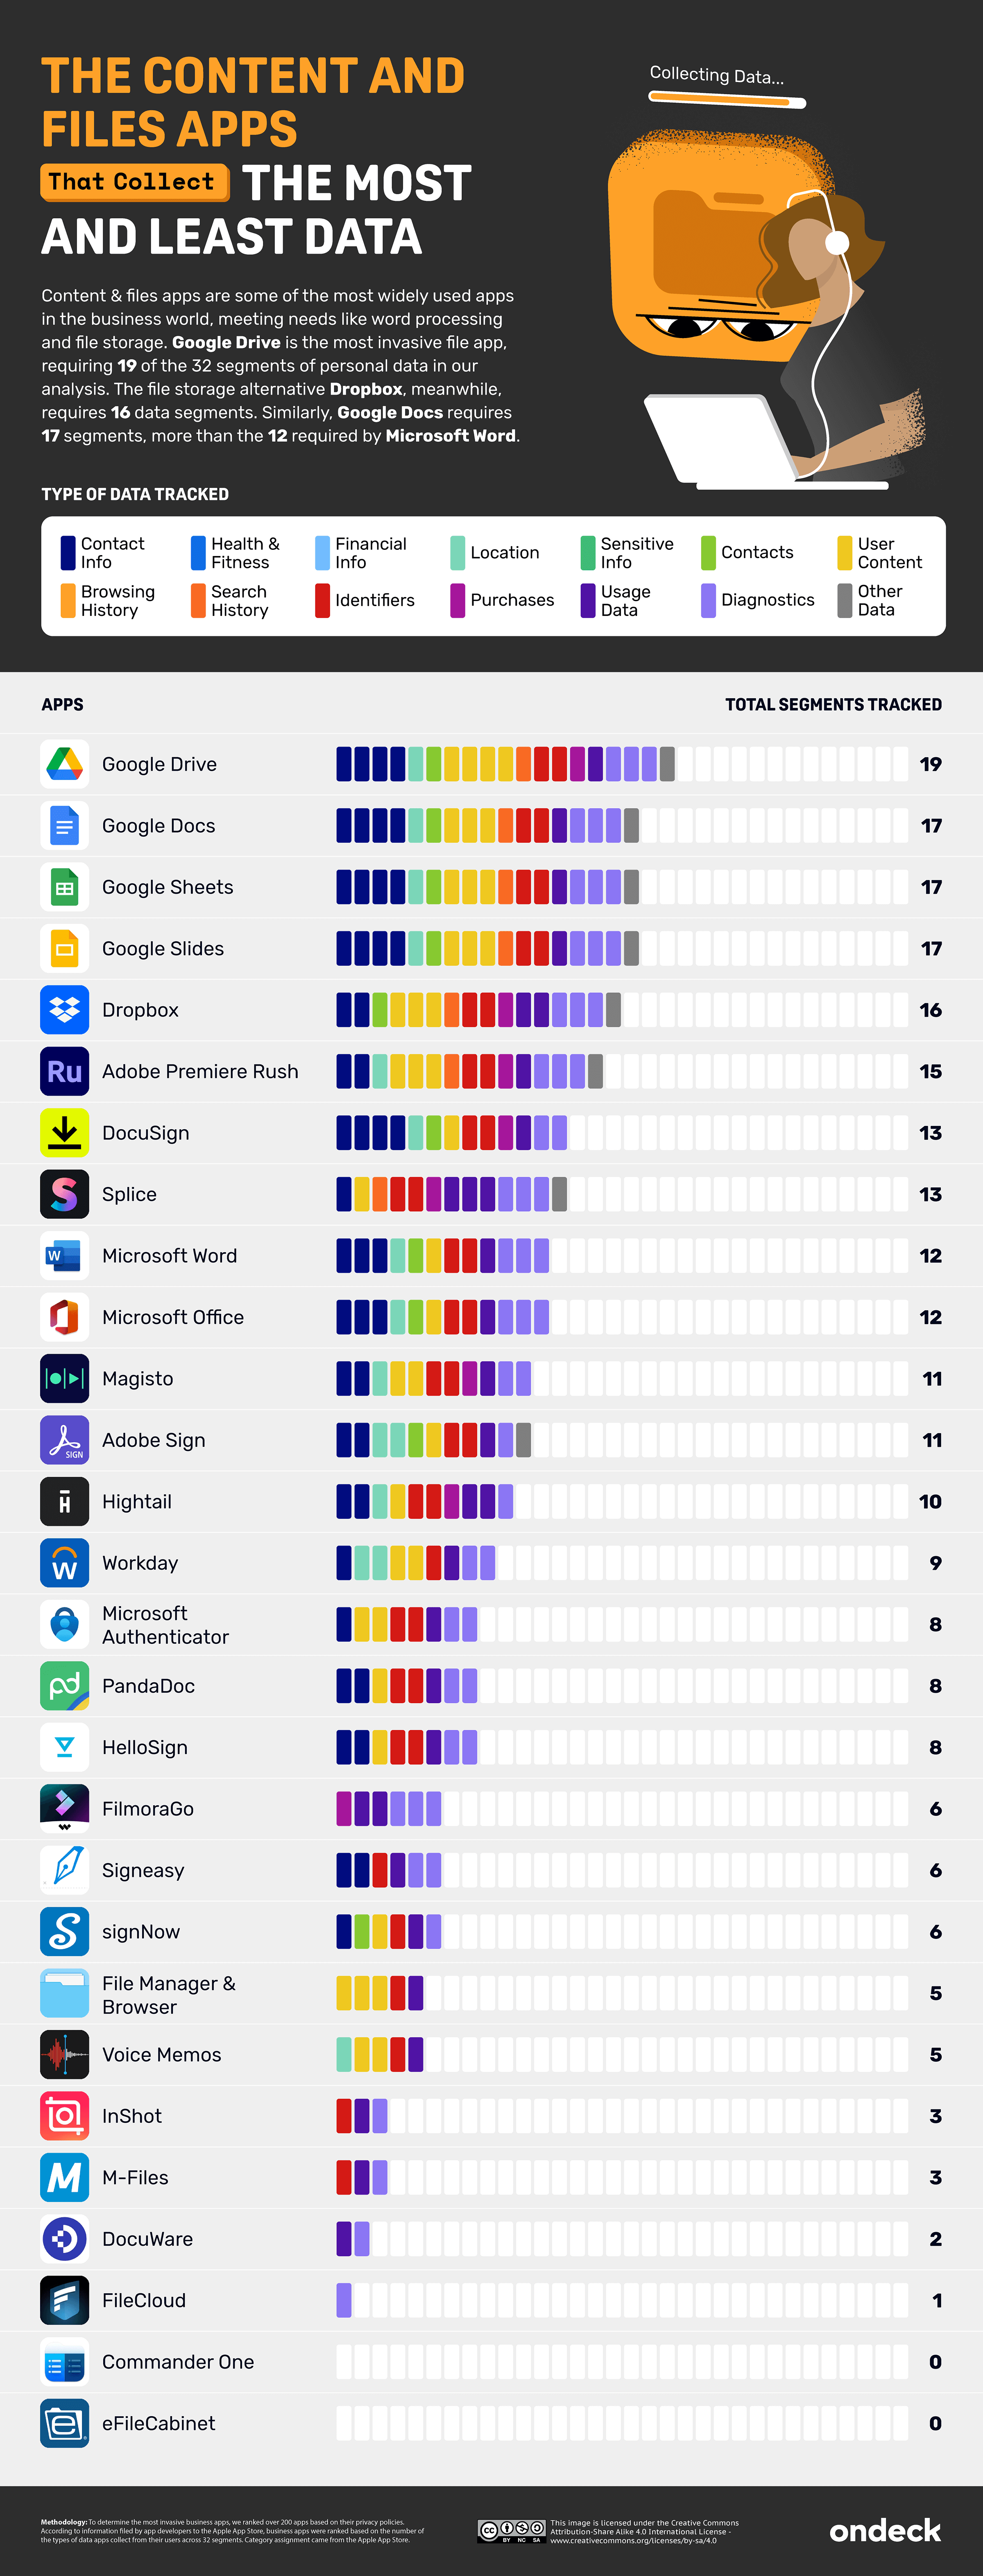 Most Invasive Content File Apps